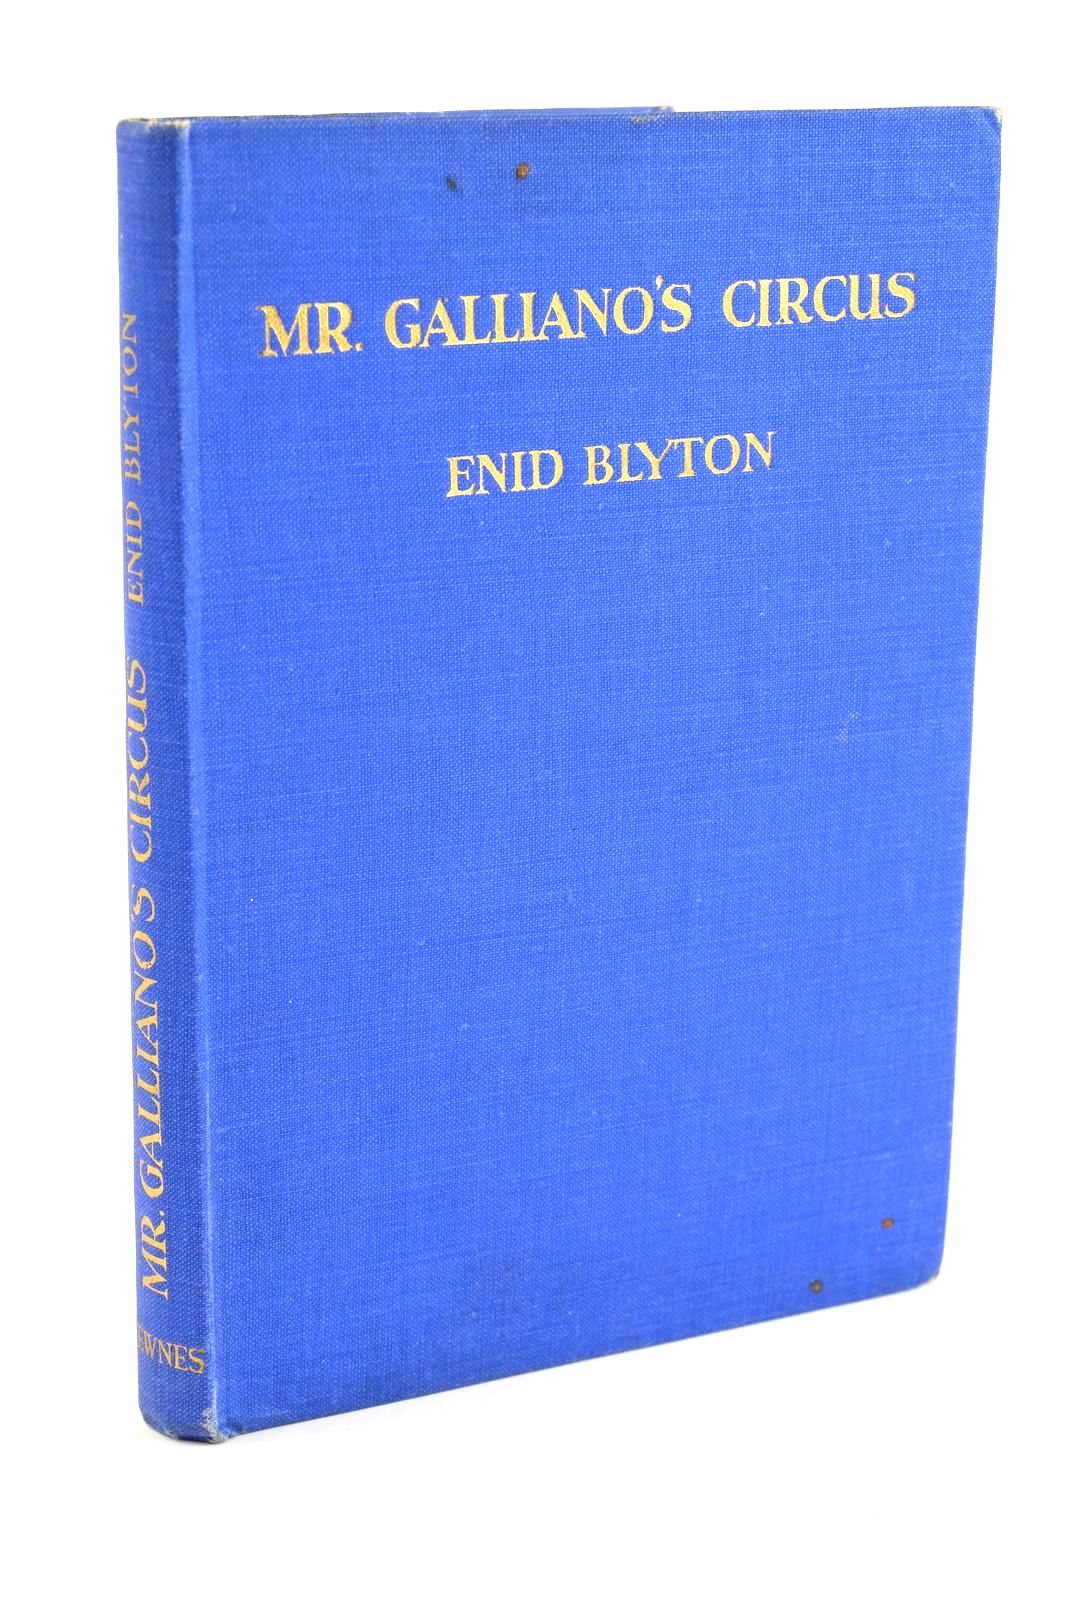 Photo of MR. GALLIANO'S CIRCUS- Stock Number: 1323549